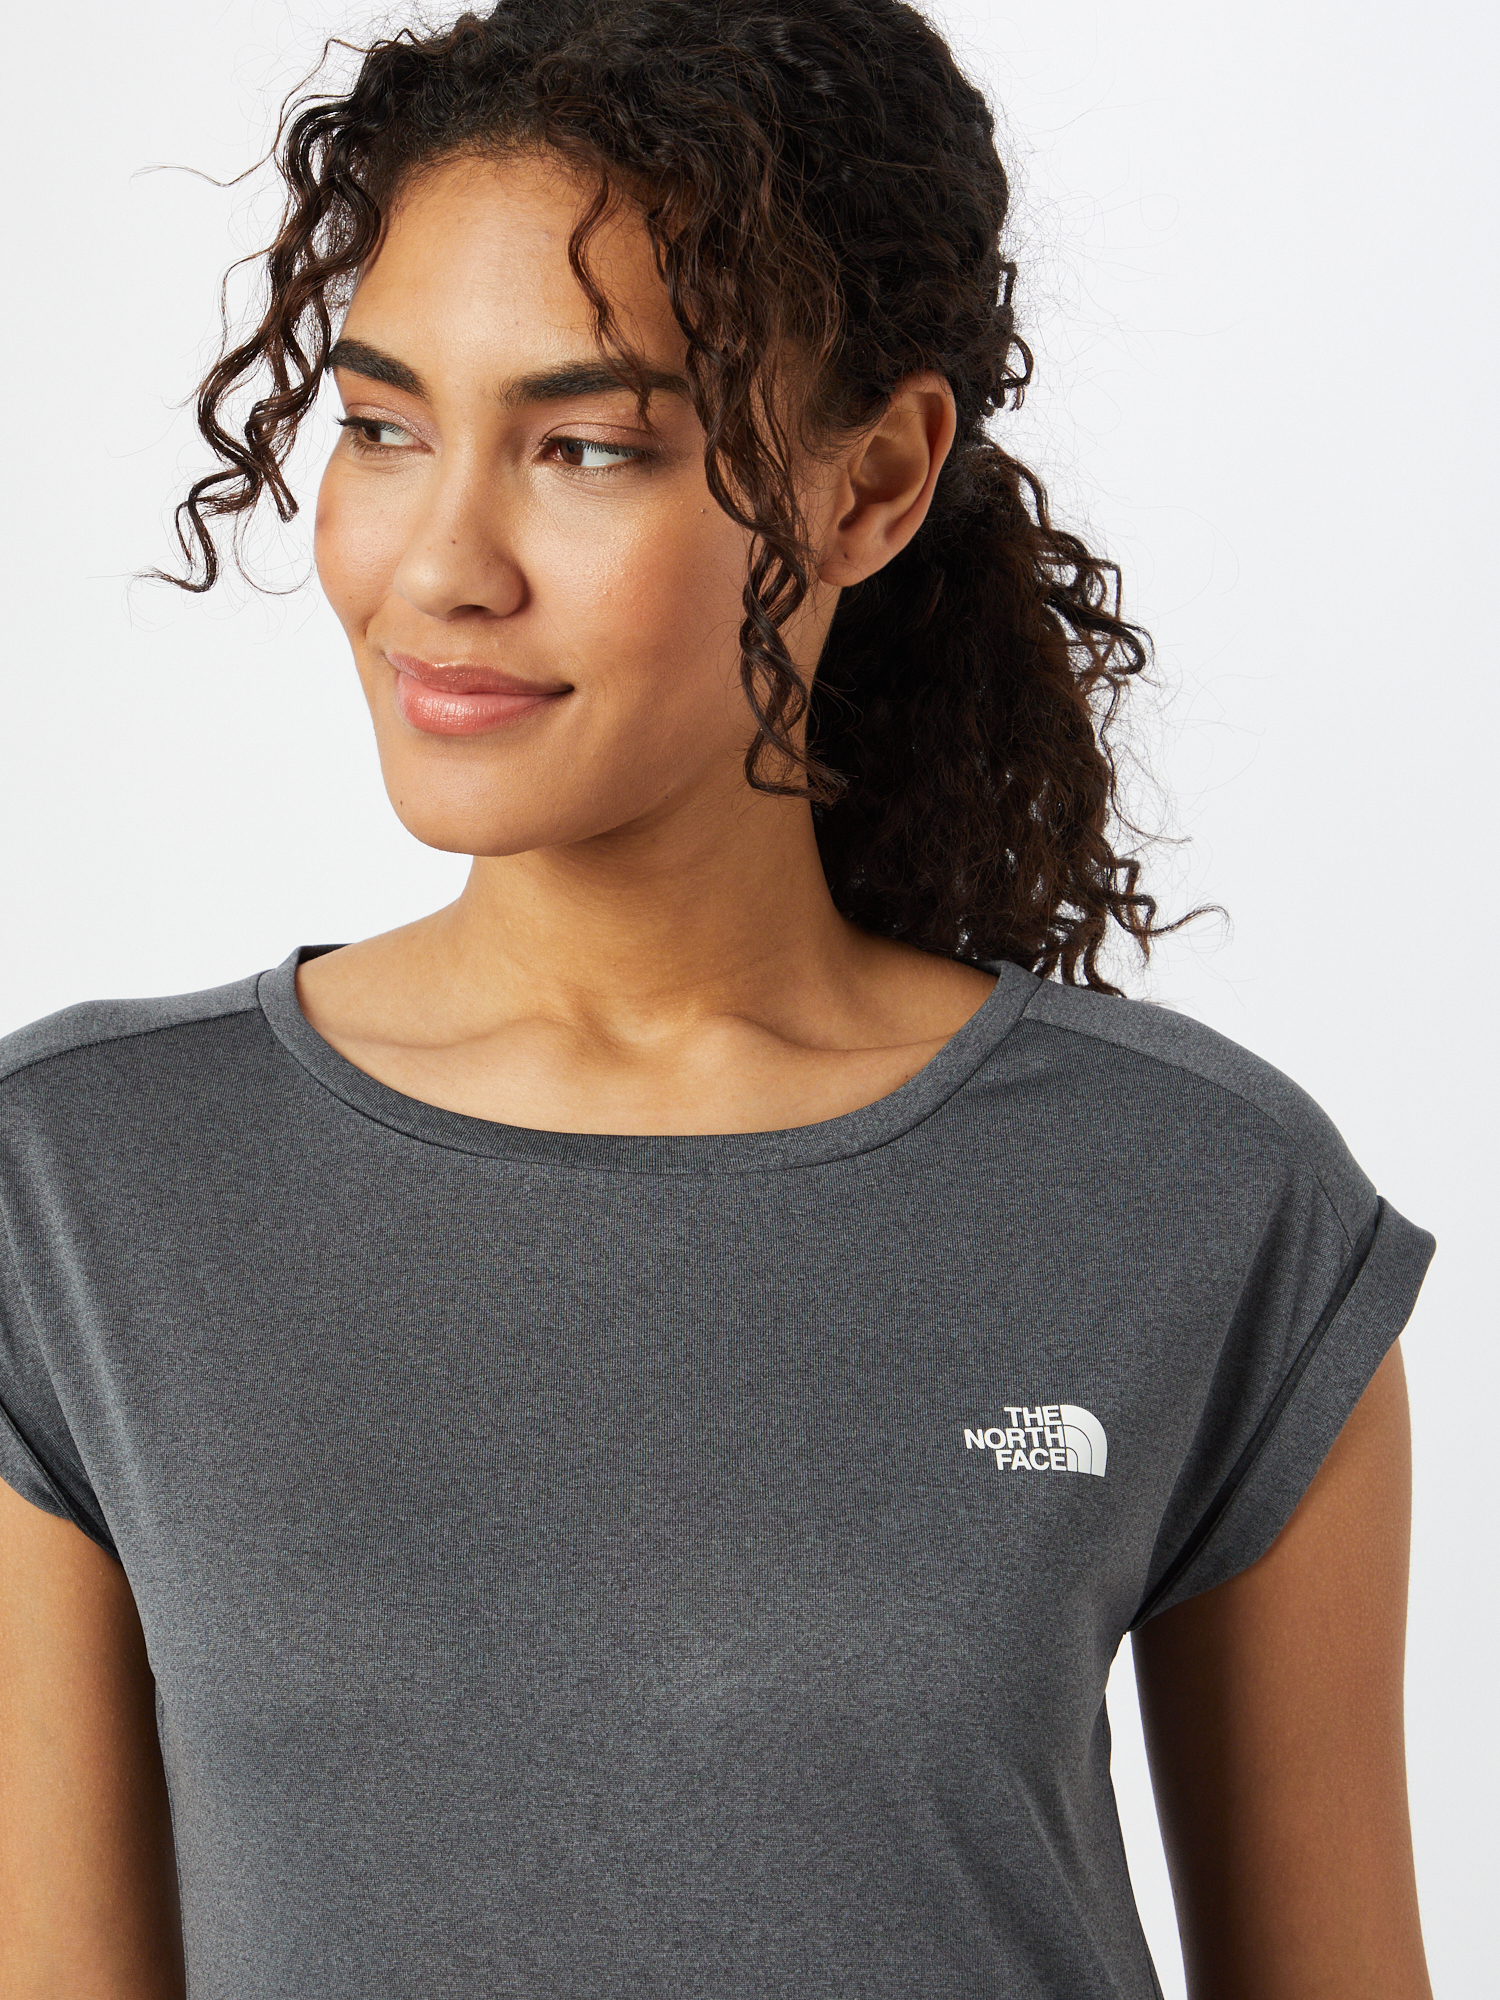 THE NORTH FACE Shirt in Graumeliert 